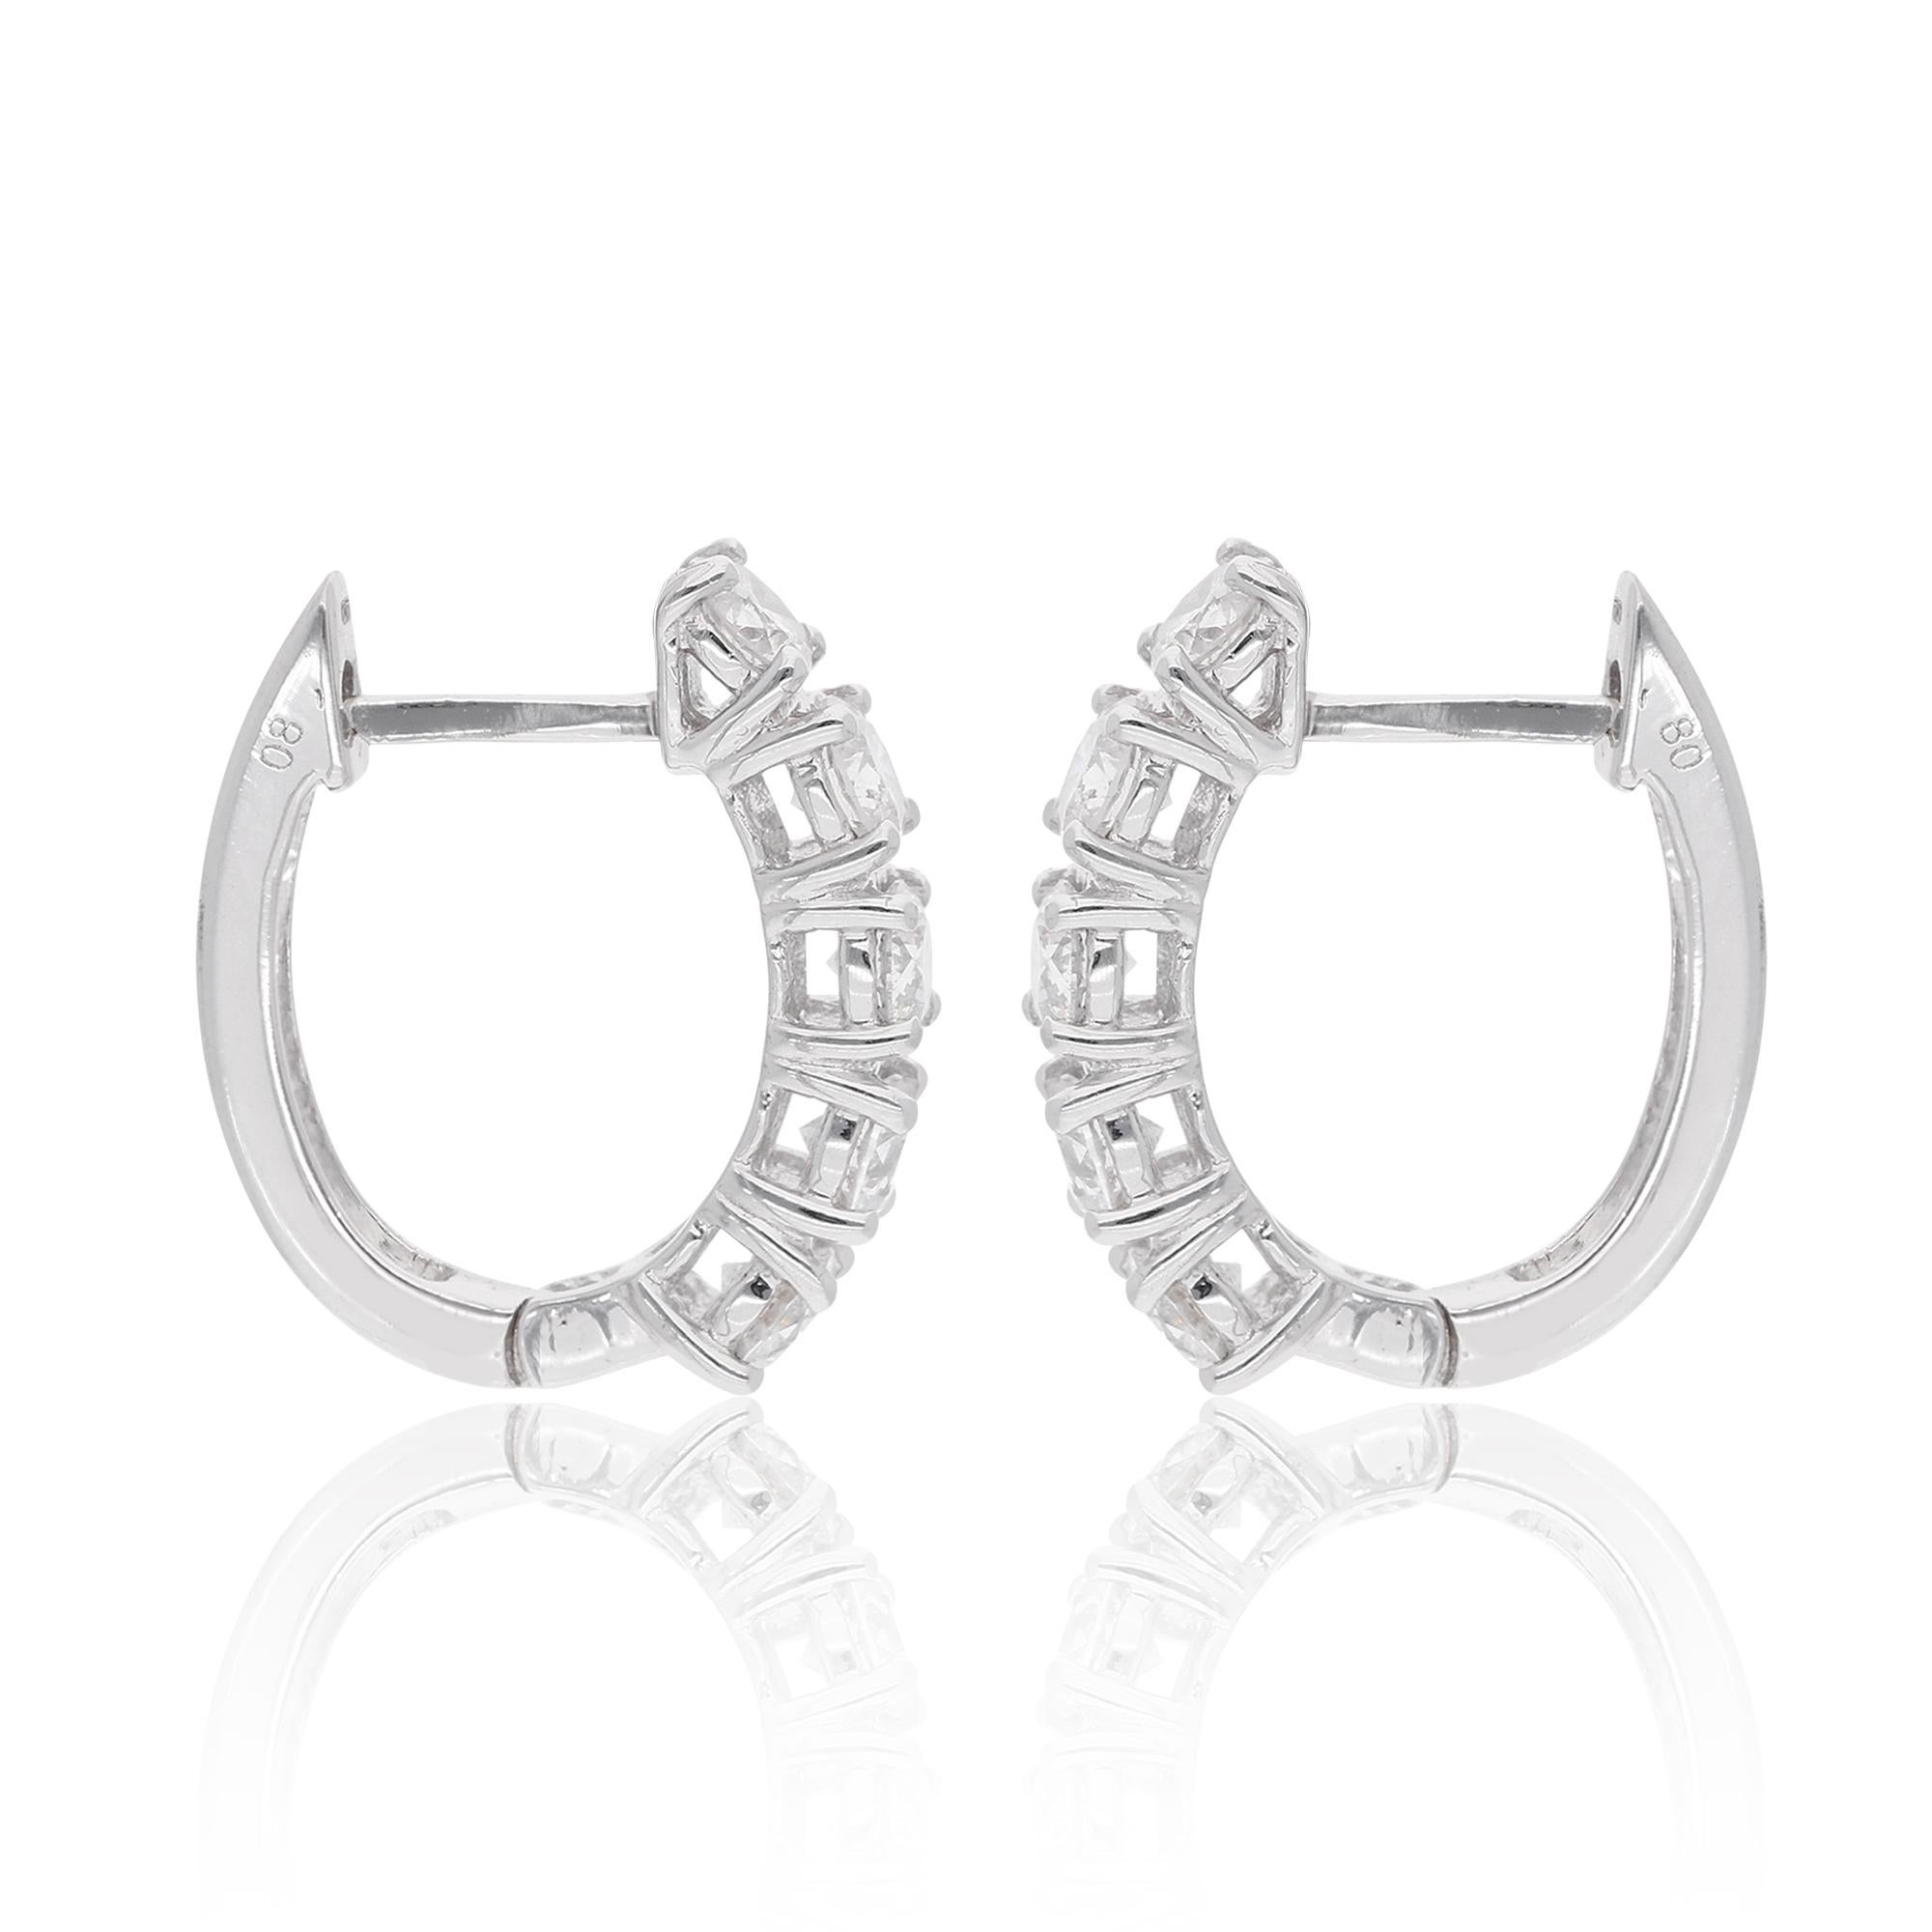 Round Cut 14 Karat White Gold Hoop Earrings 2.20 Carat SI Clarity HI Color Diamond Jewelry For Sale